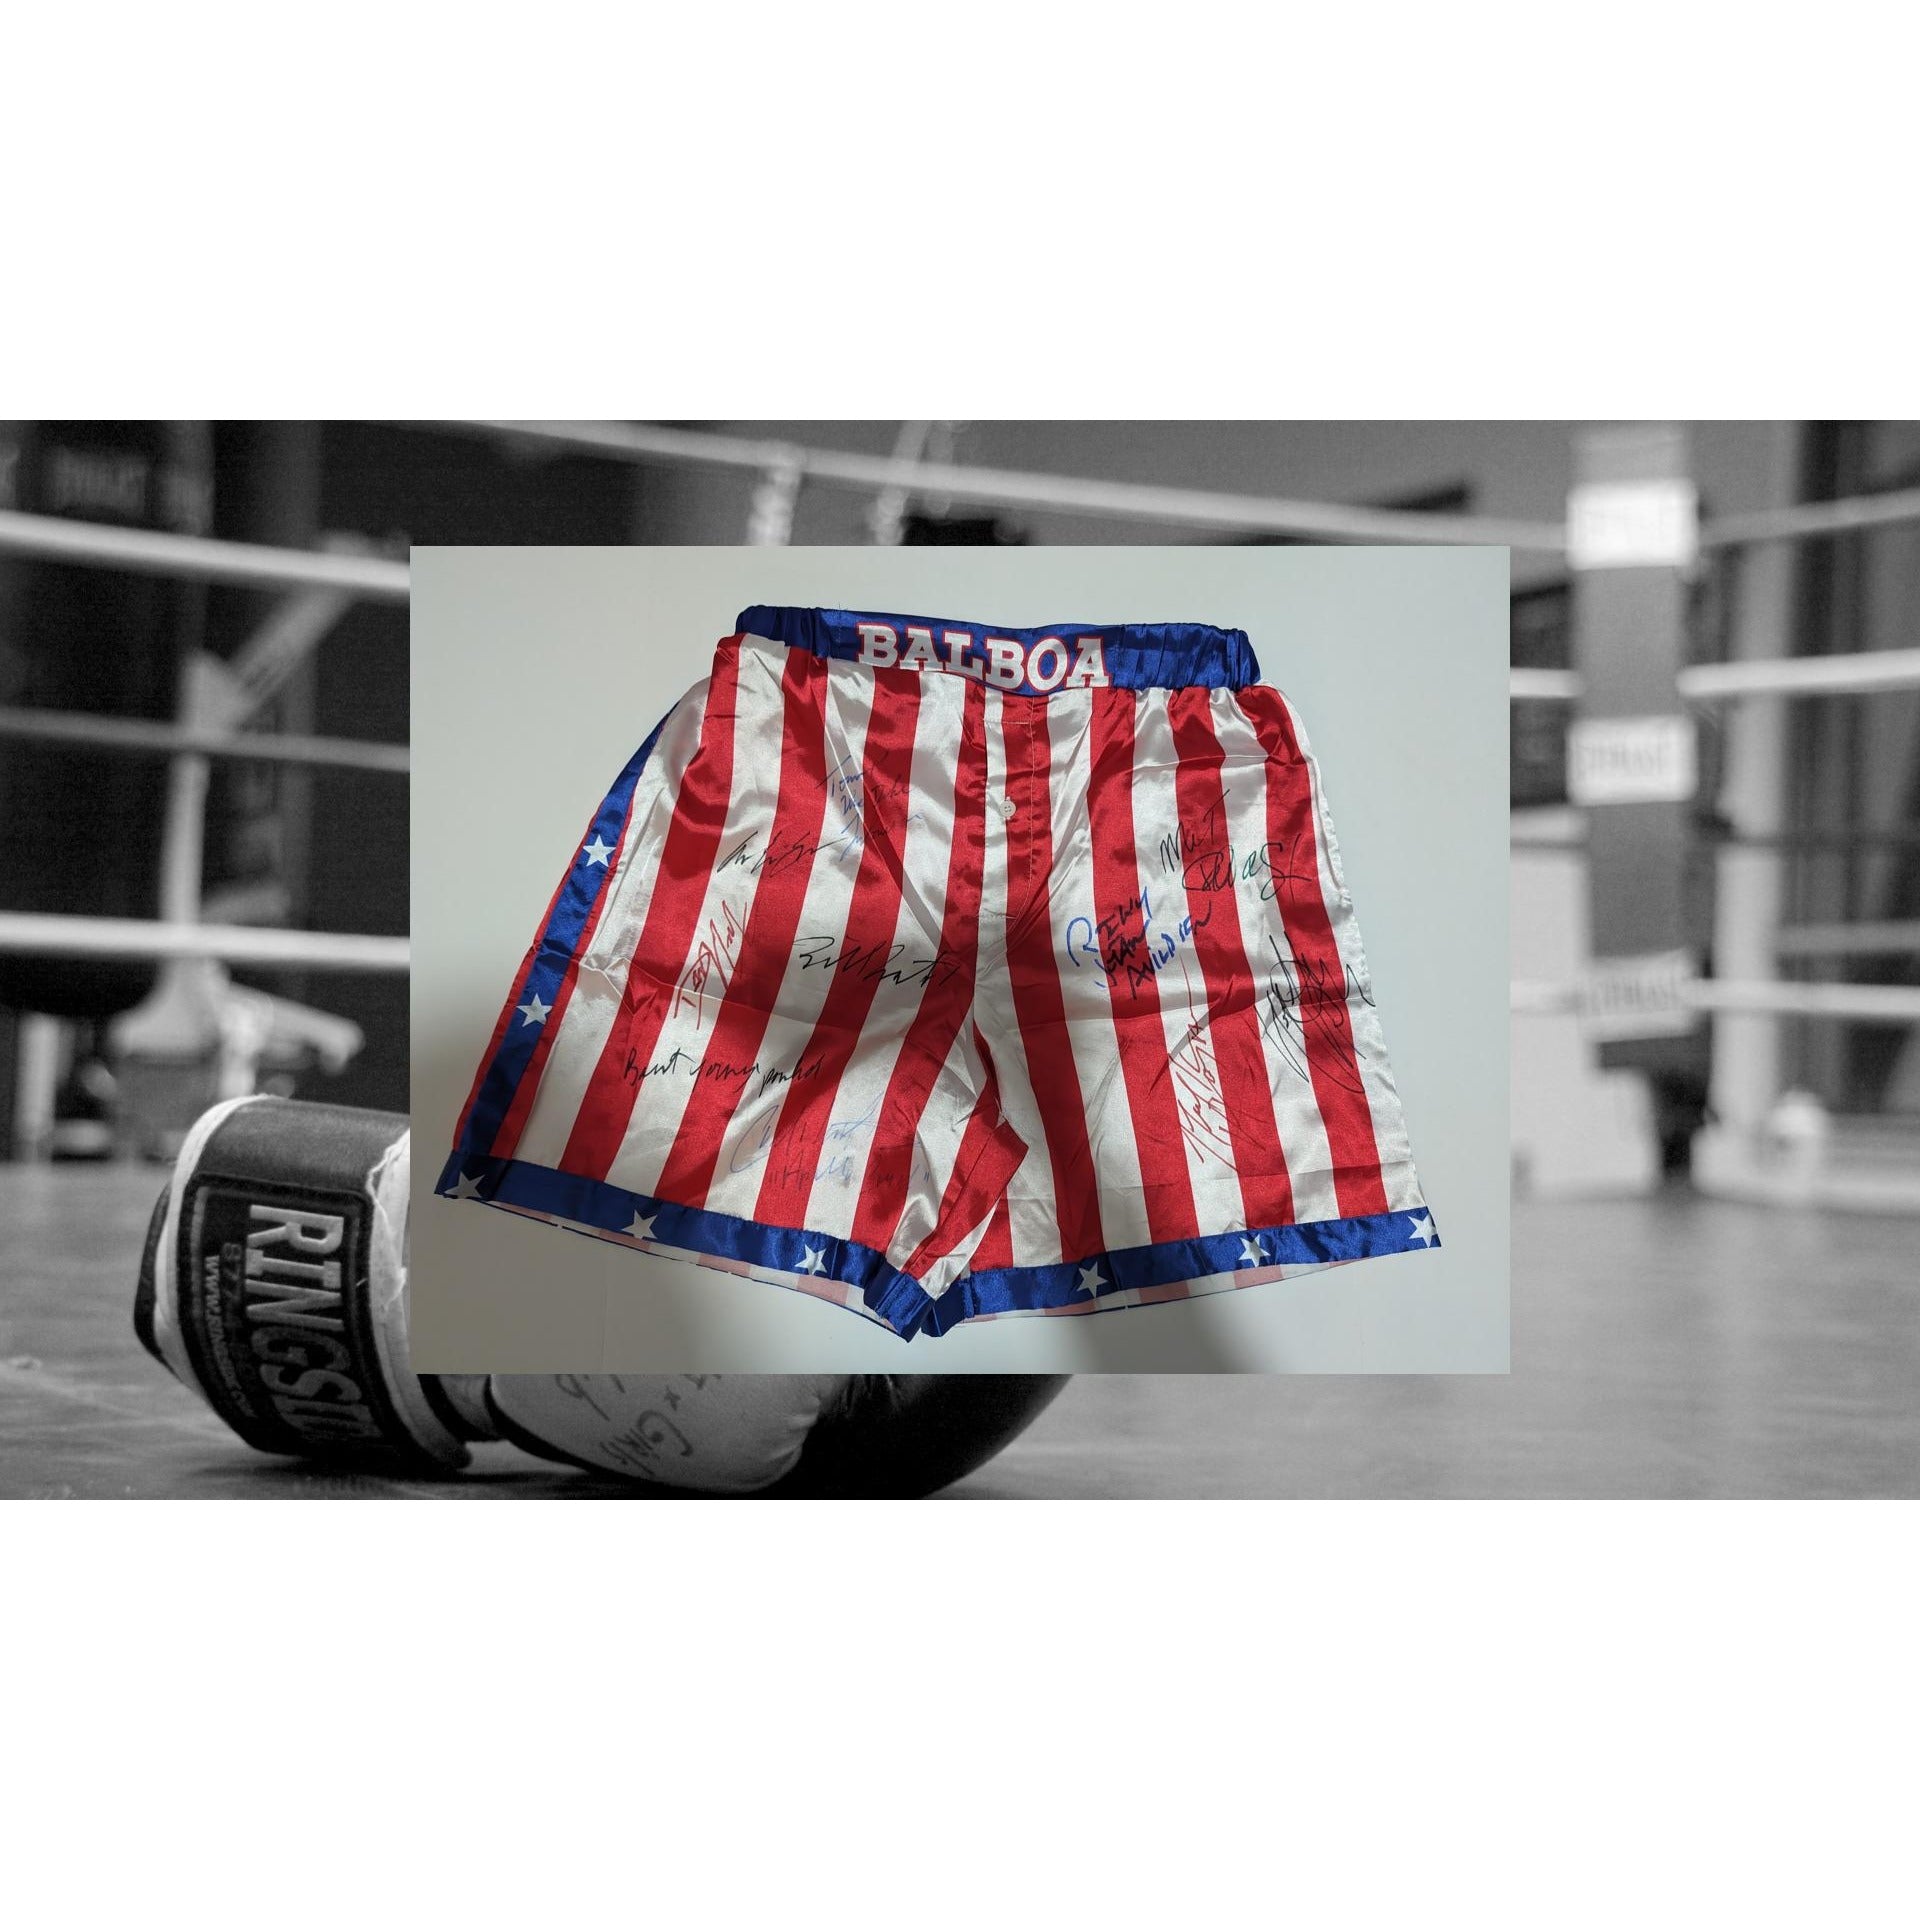 Rocky Balboa USA boxing shorts signed by the cast of Rocky including Sylvester Stallone Carl Weathers talliest shire Mr T Bert Young dolls l